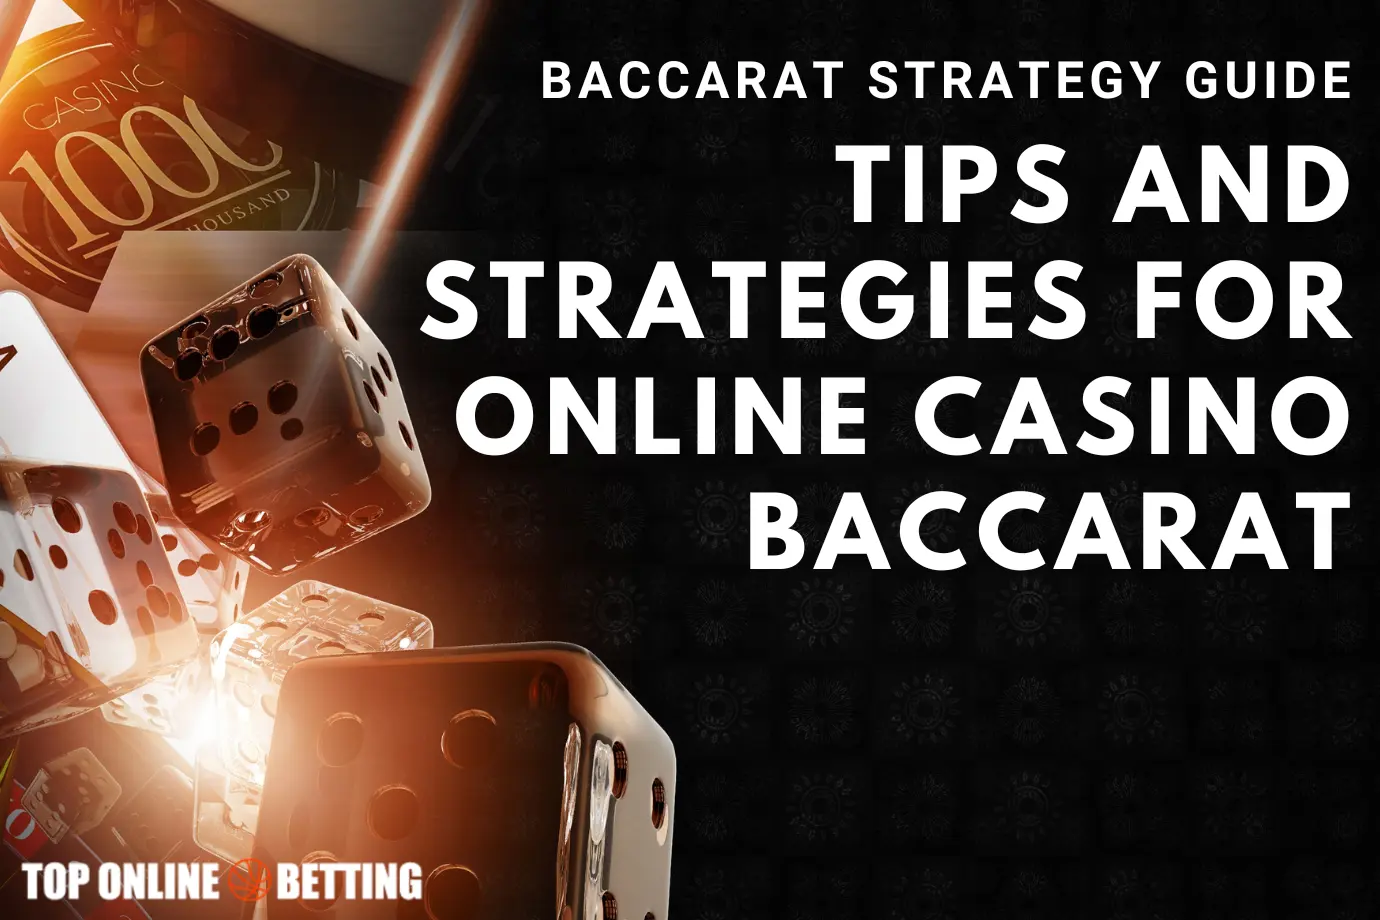 Baccarat Strategy Guide Tips and Strategies for Online Casino Baccarat